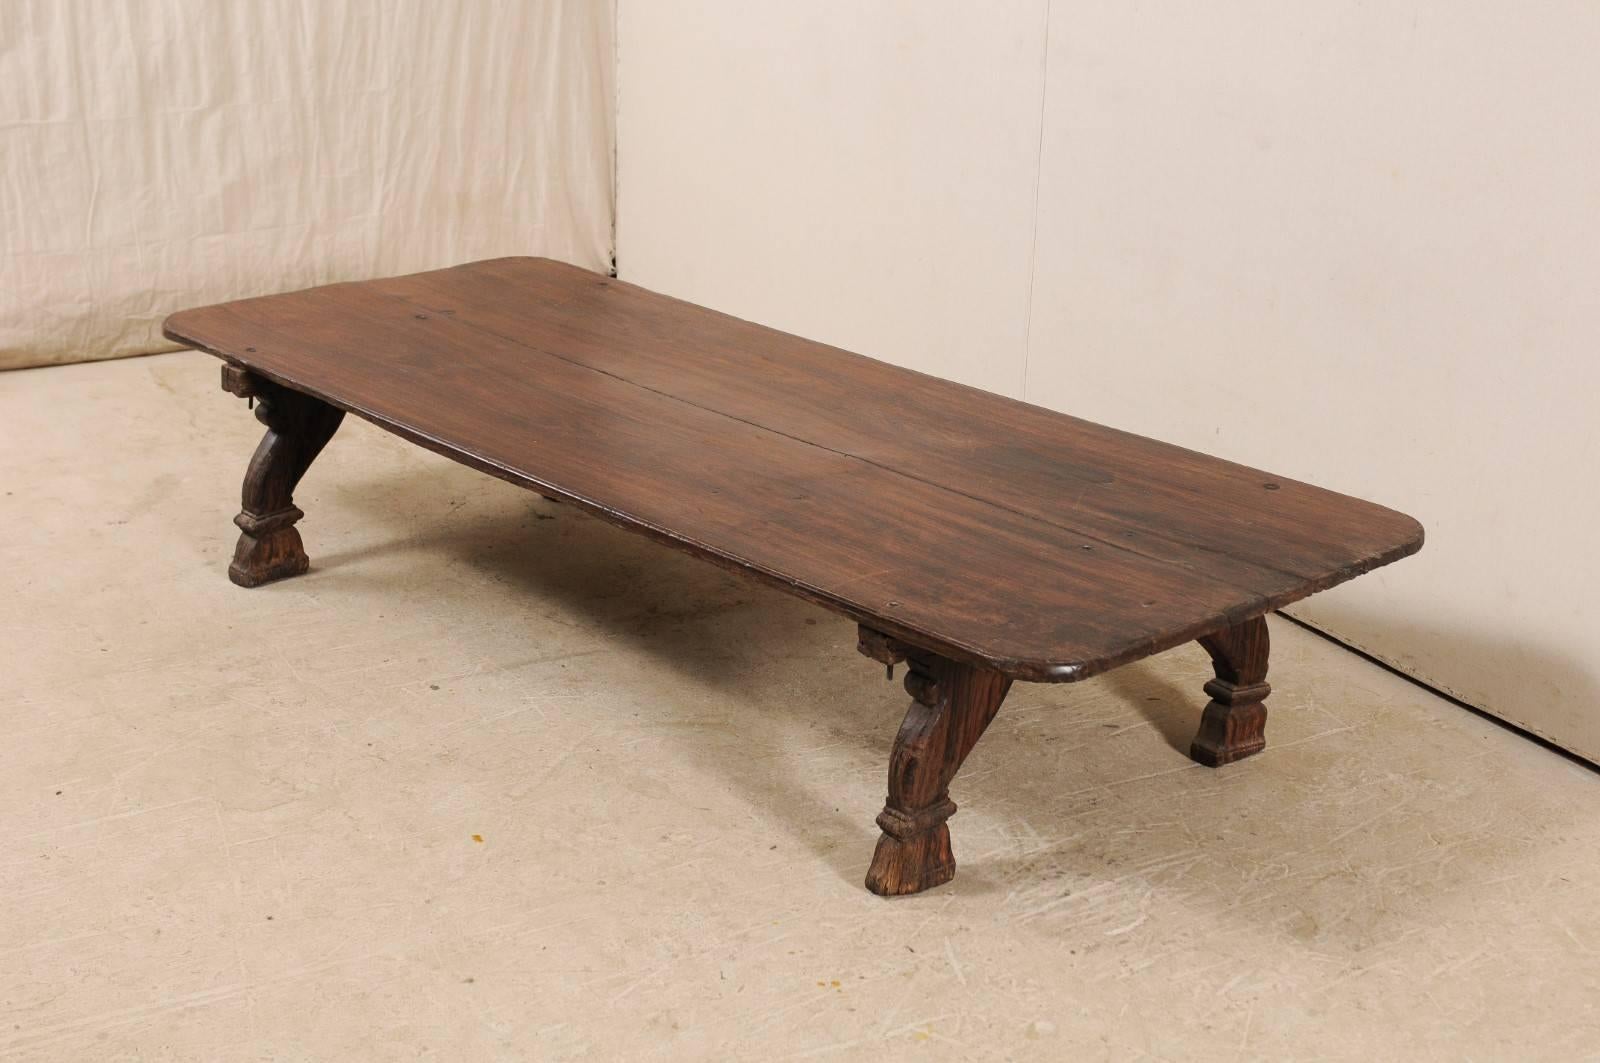 British Colonial Midcentury, Rectangular Carved Wood Coffee Table 1